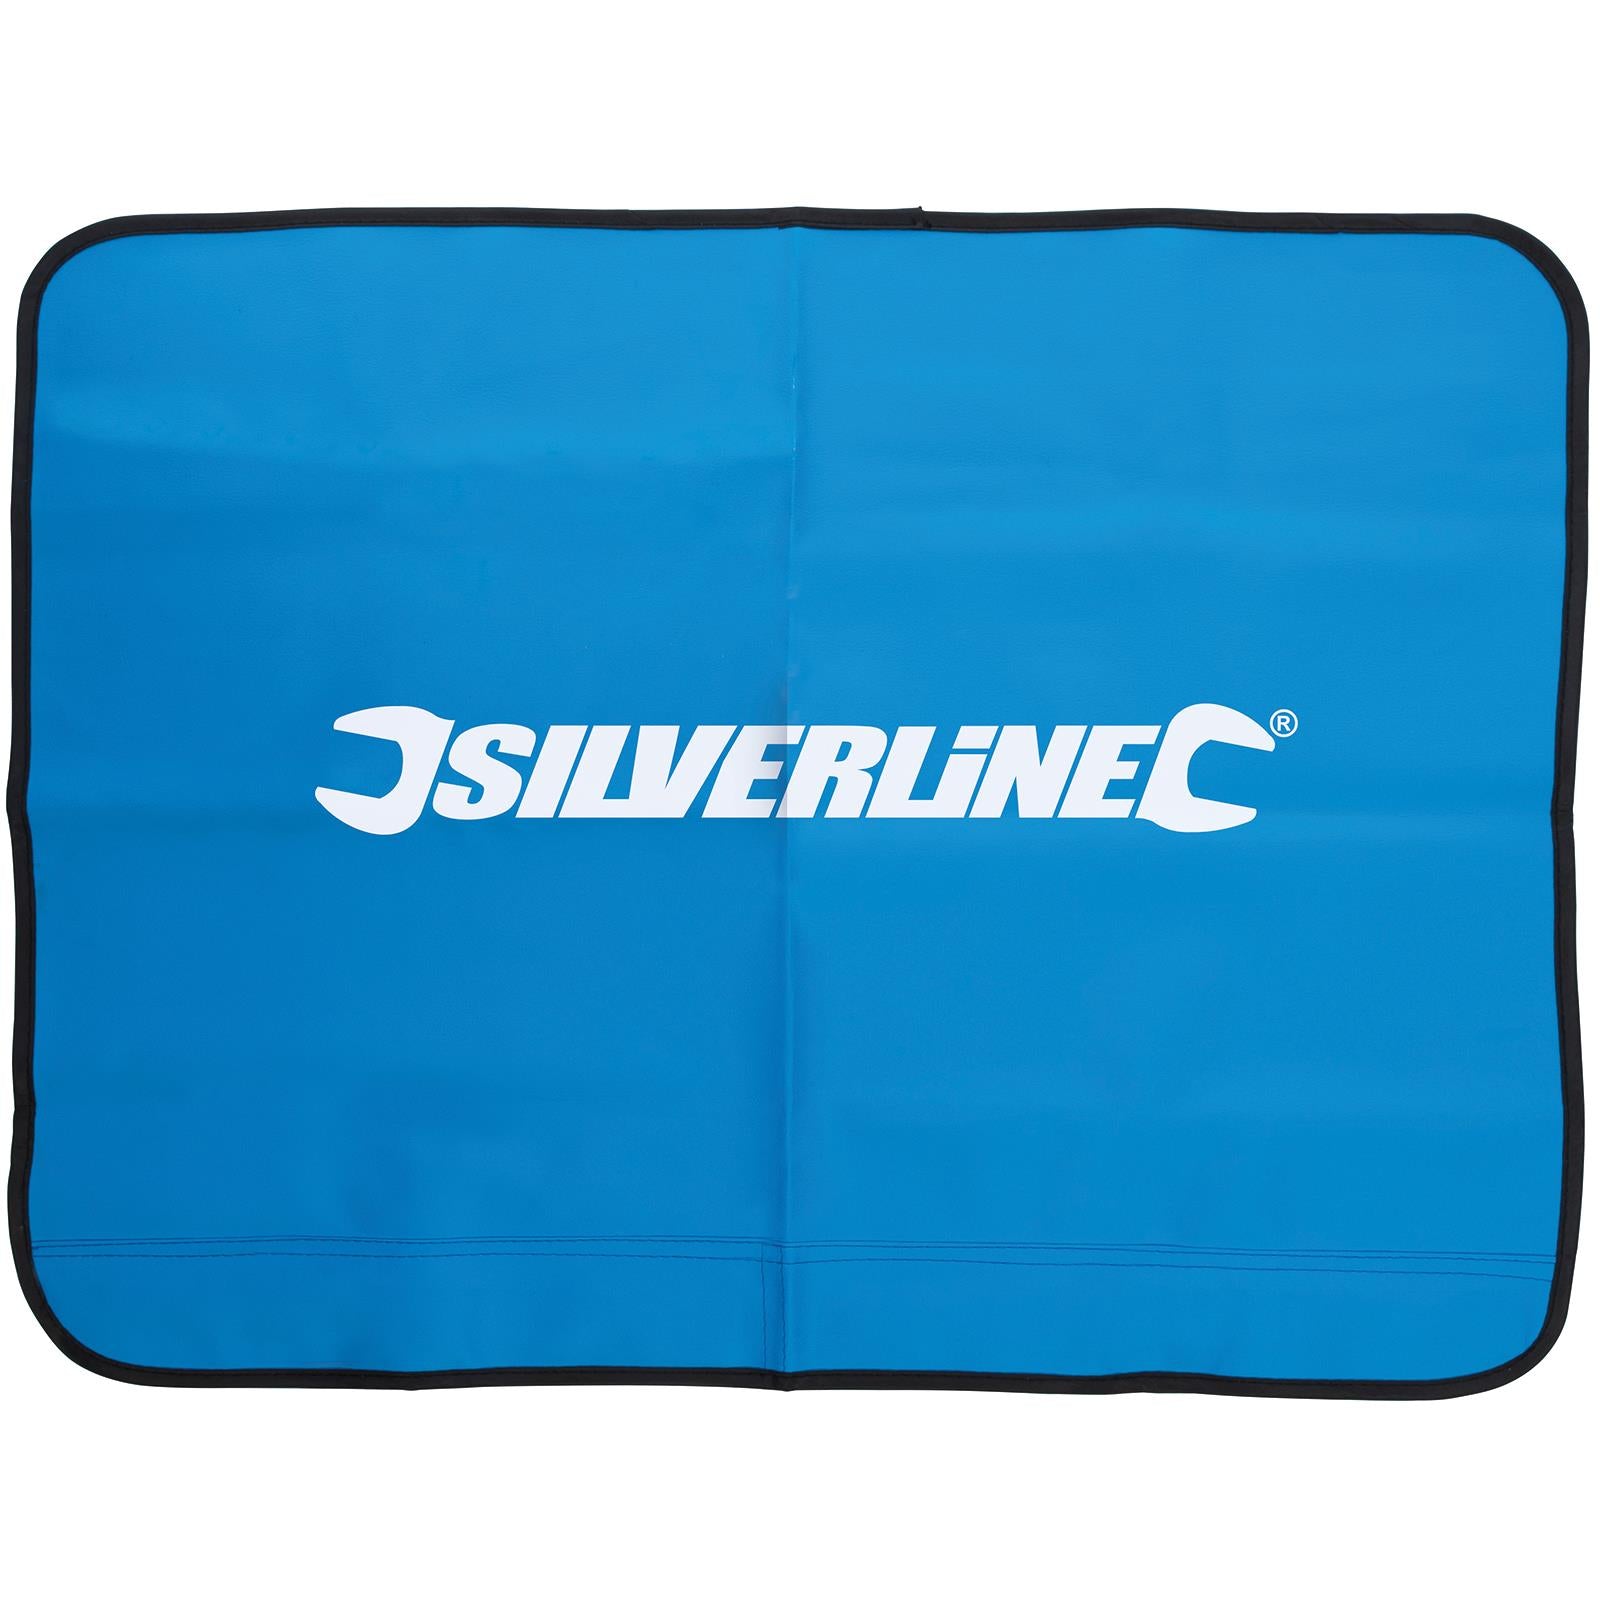 Silverline Car Bodywork Protector Scratch Repairs Magnetic Cover